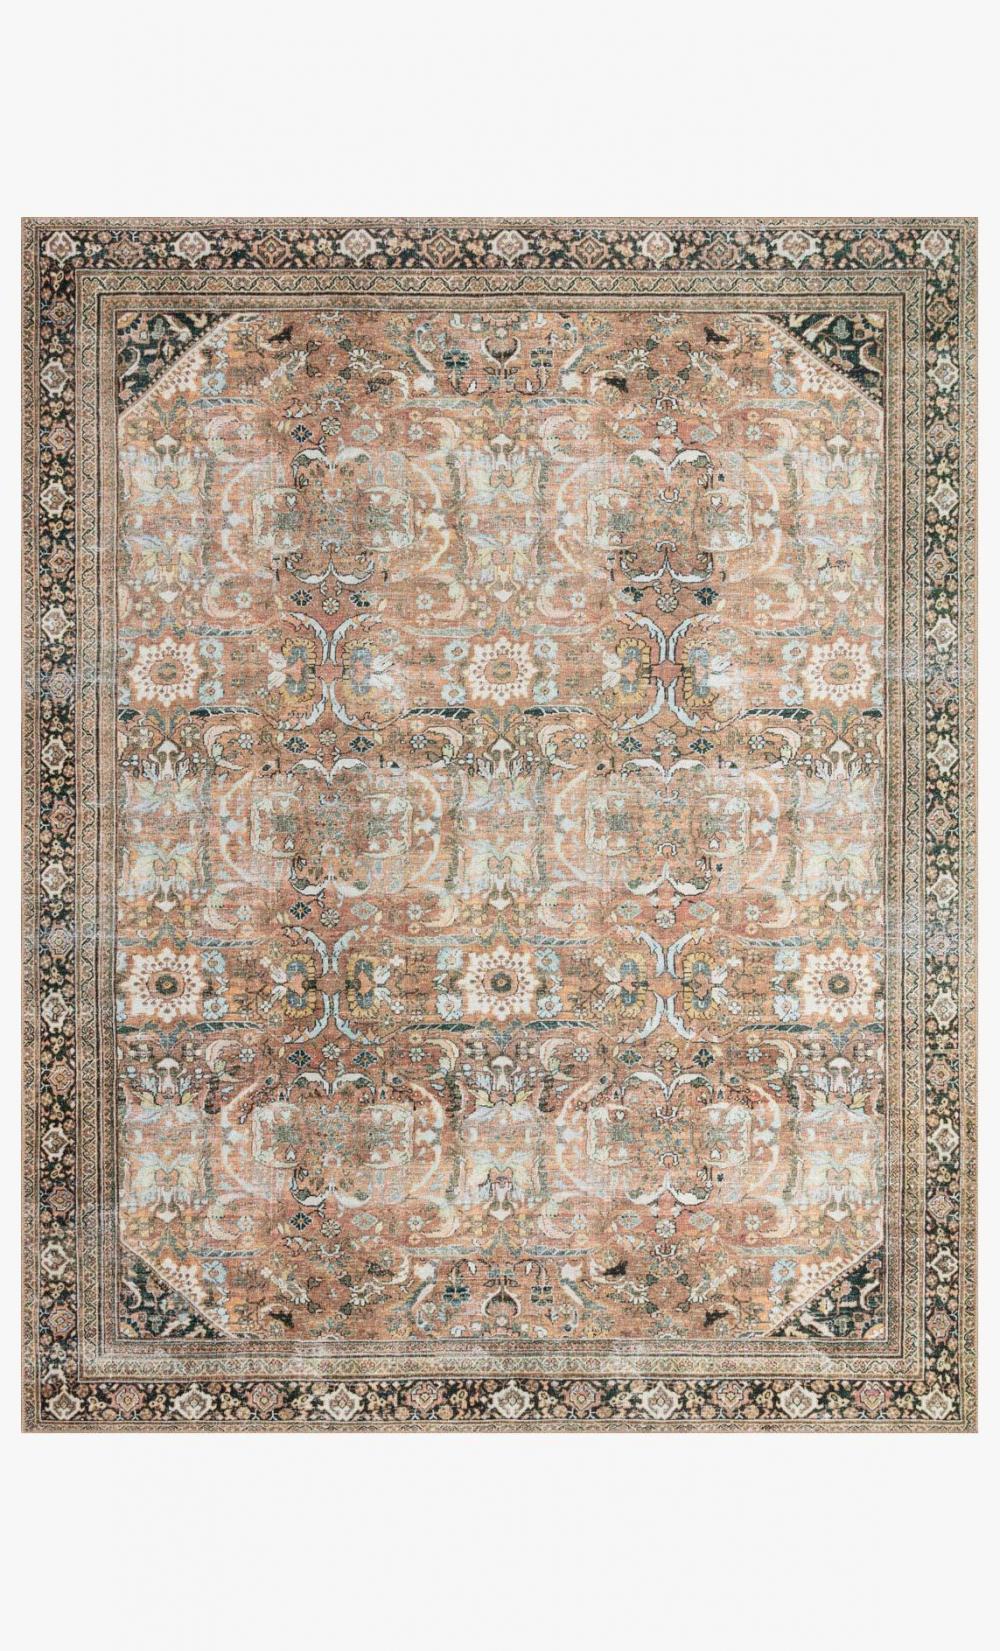 Discover The Traditional Auburn rug, blending heritage and versatility for any space. Ideal for traditional or contemporary interiors, it adds sophistication to classic or modern settings.